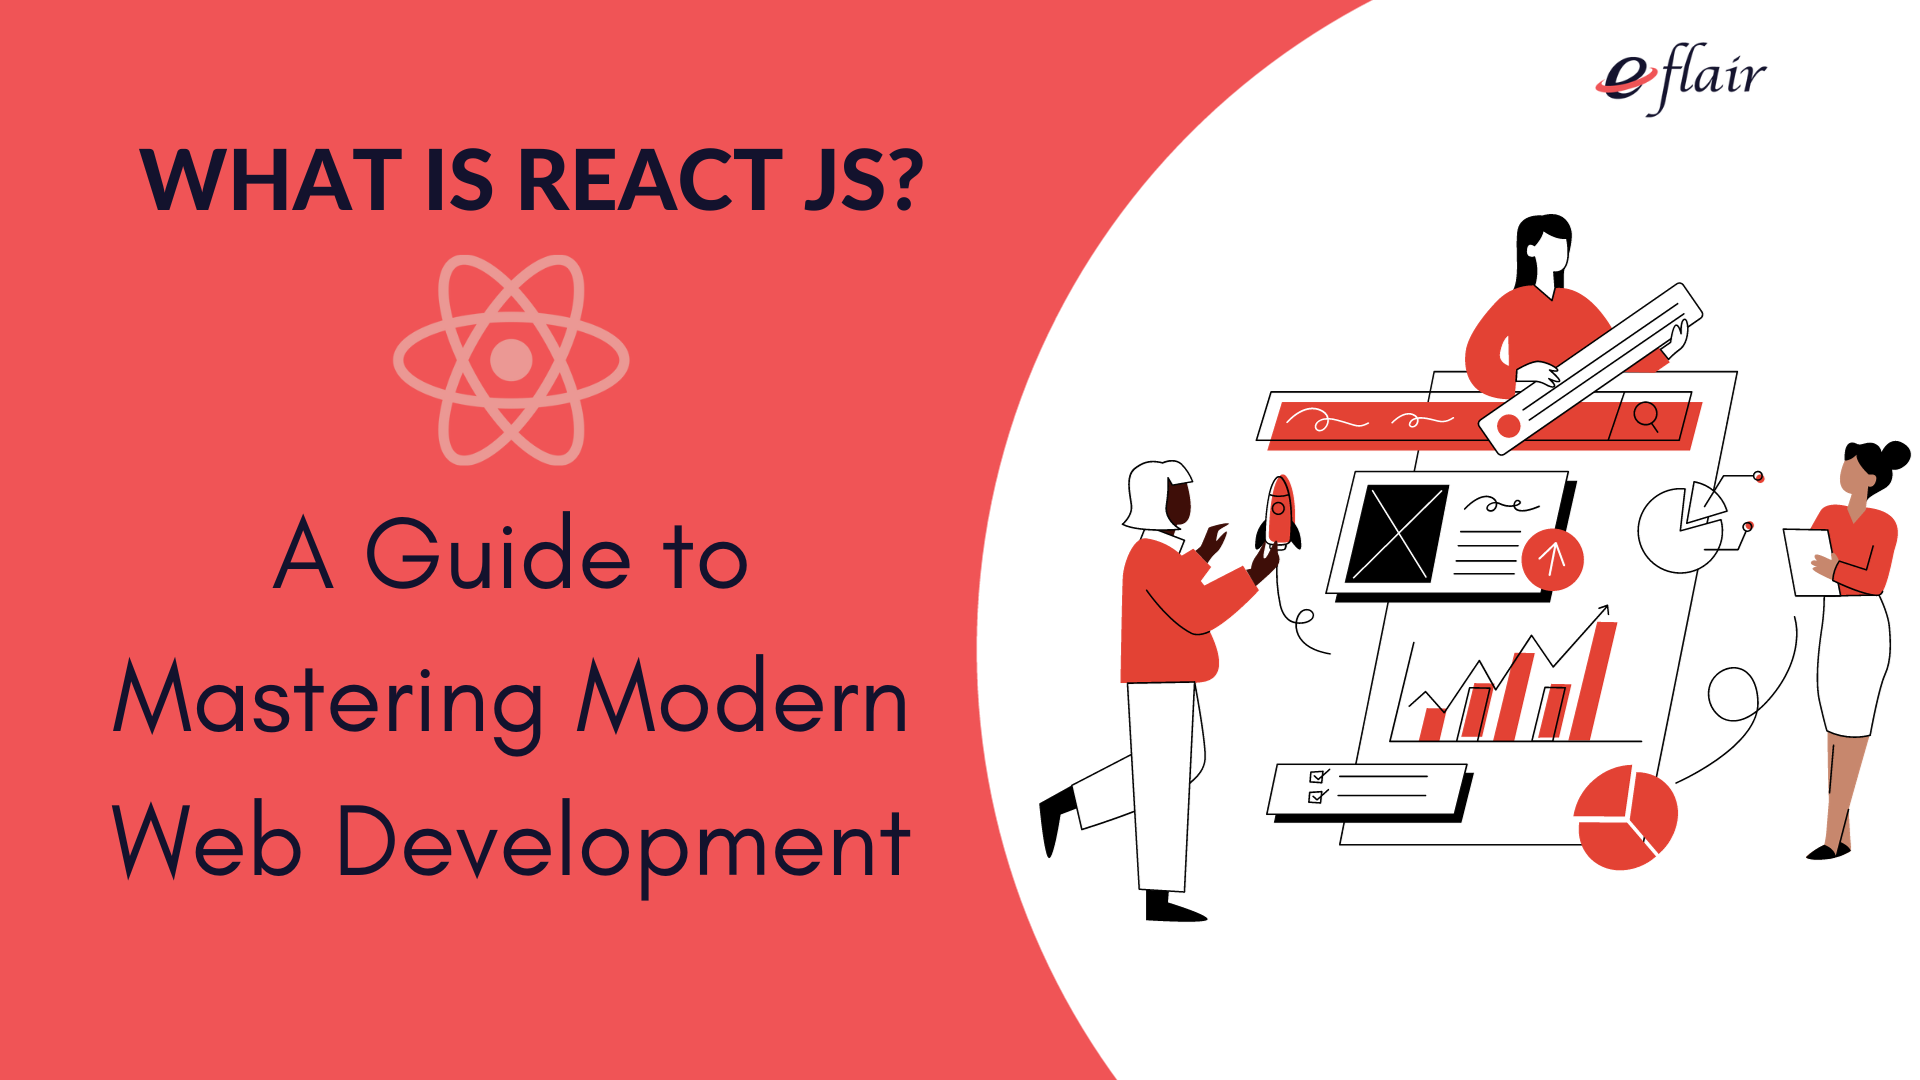 What is React JS